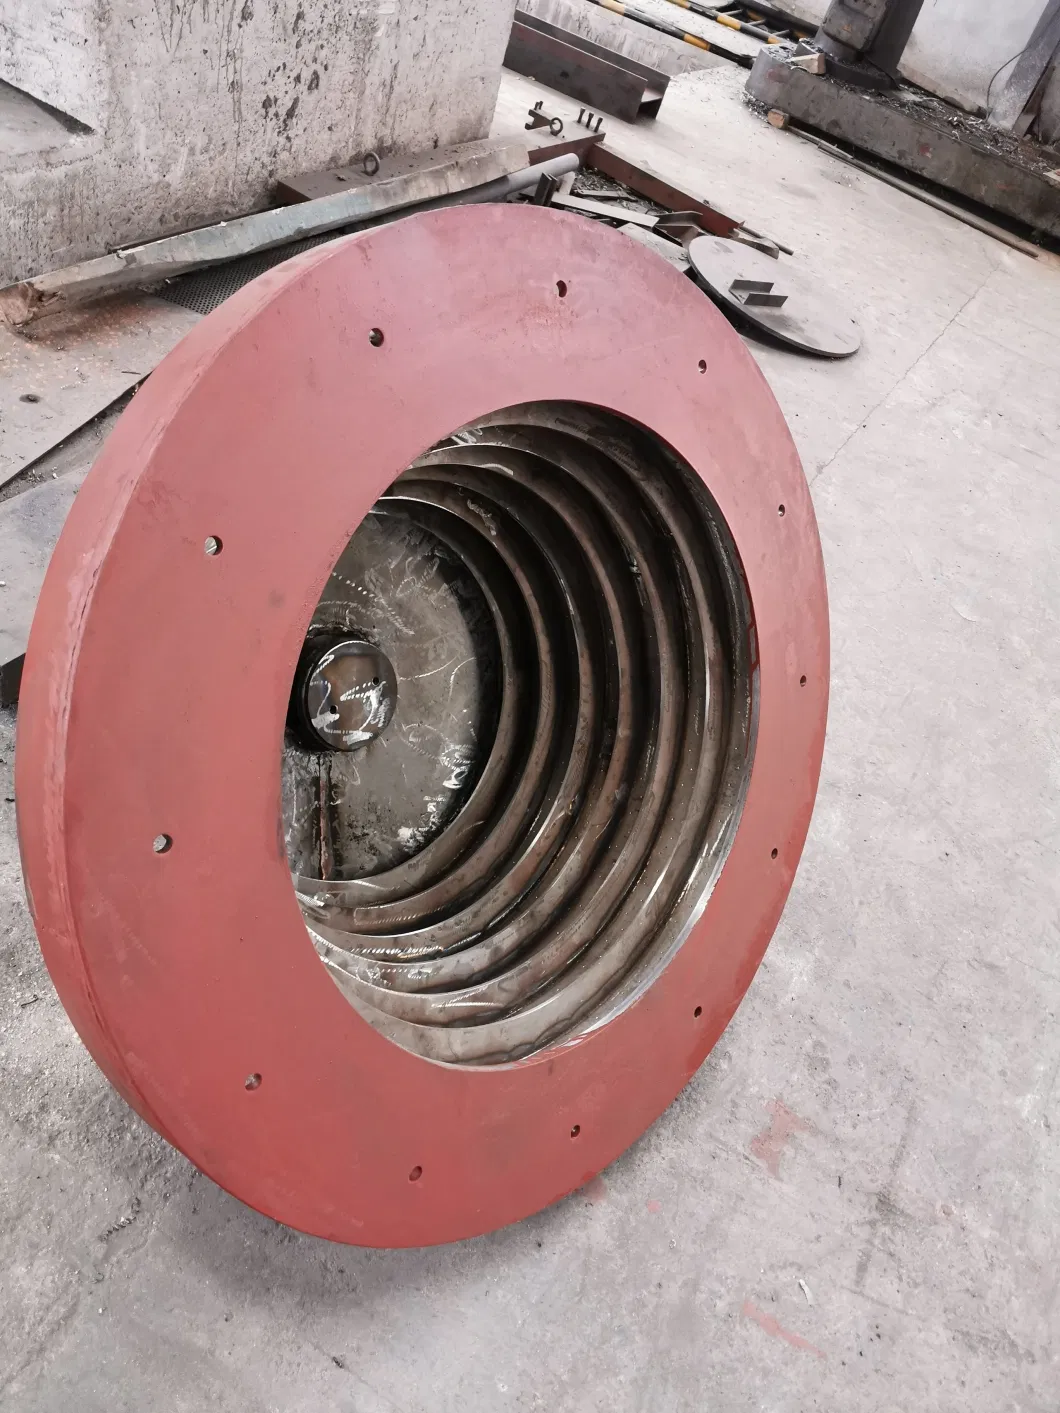 Gold Mining Equipment Knelson Centrifugal Concentrator Avoid Tailings